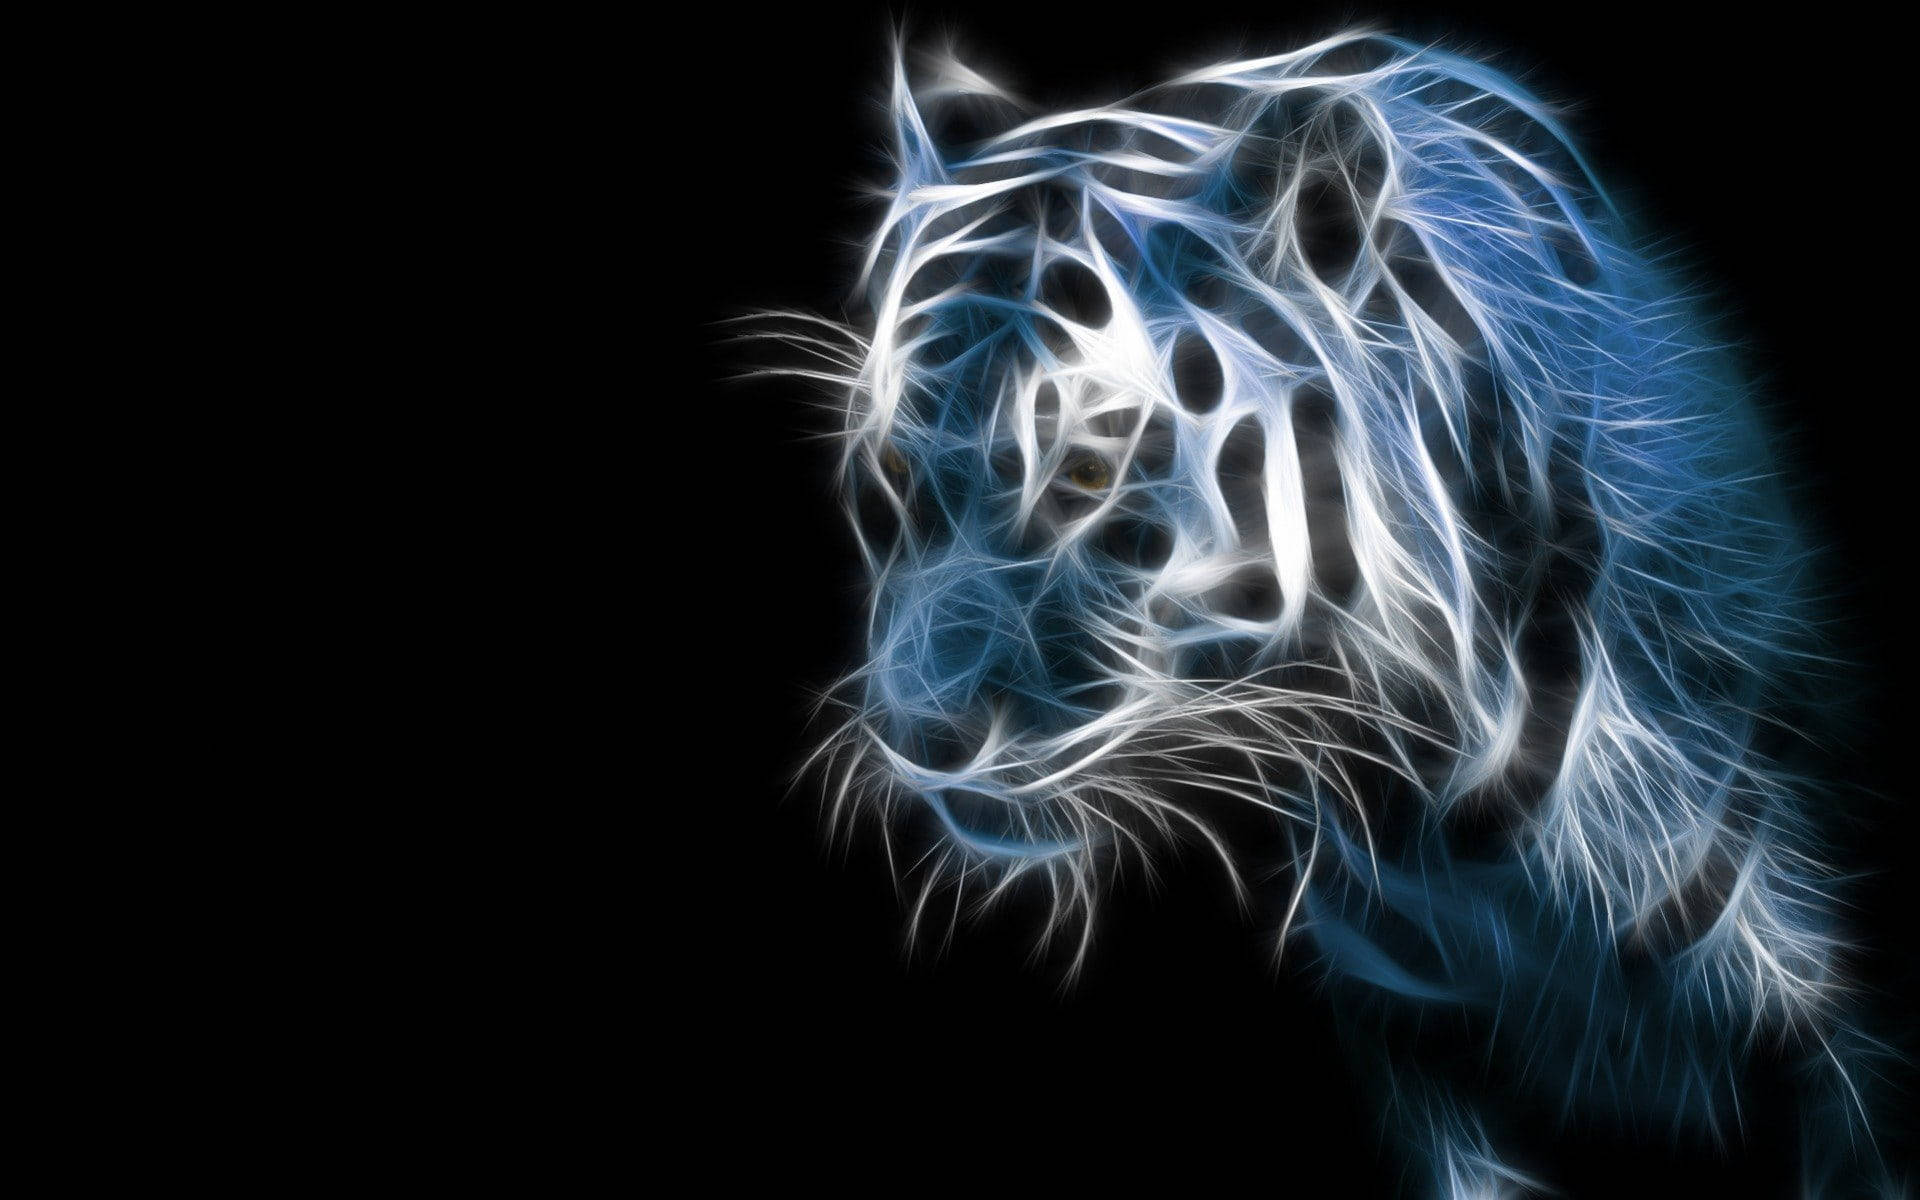 Cool Blue And White Tiger Art Wallpaper